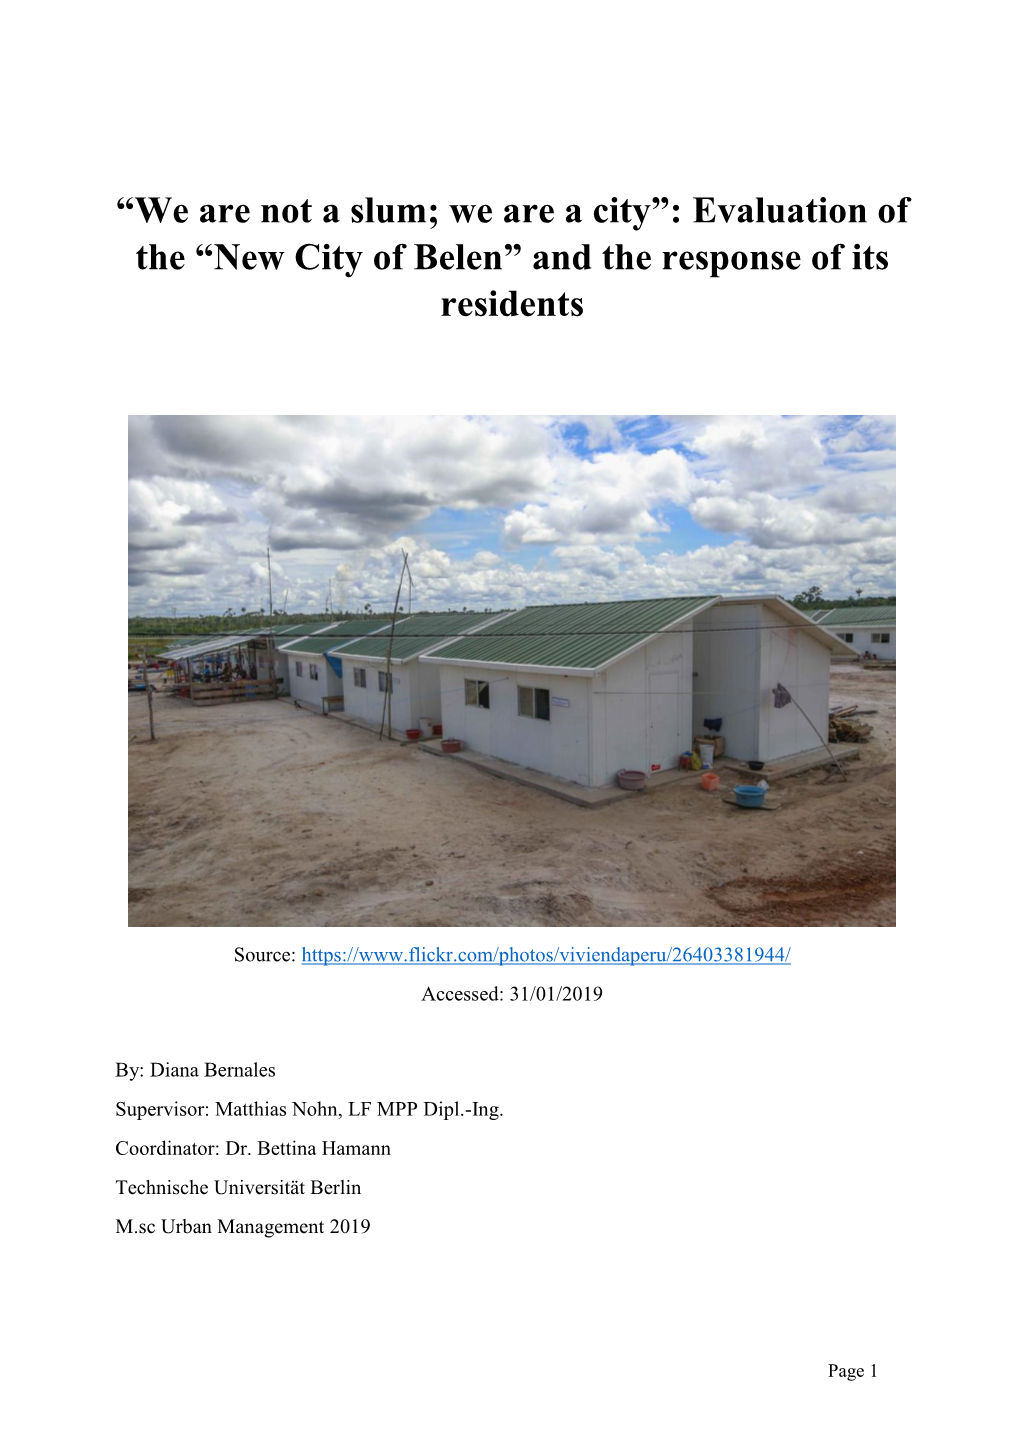 New City of Belen” and the Response of Its Residents